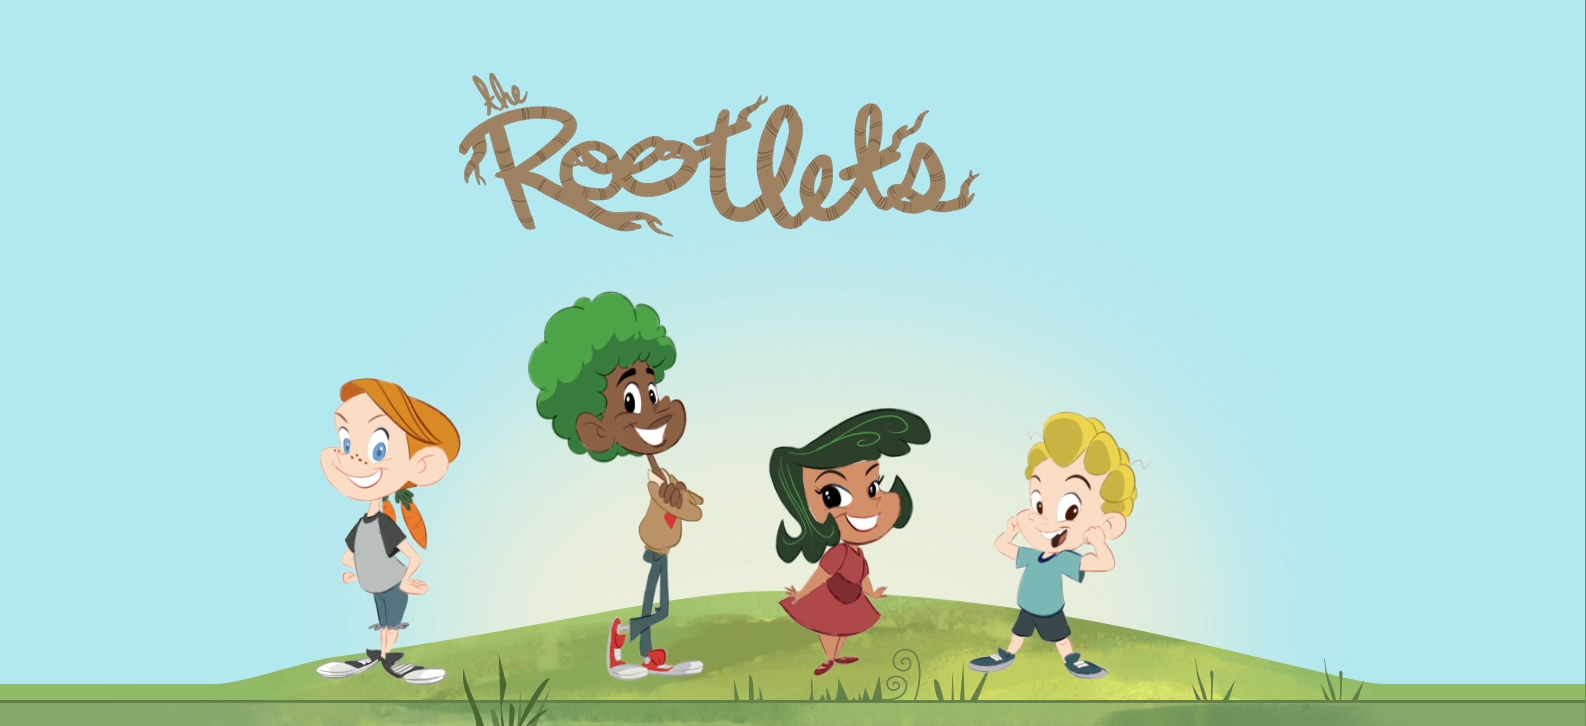 The Rootlets